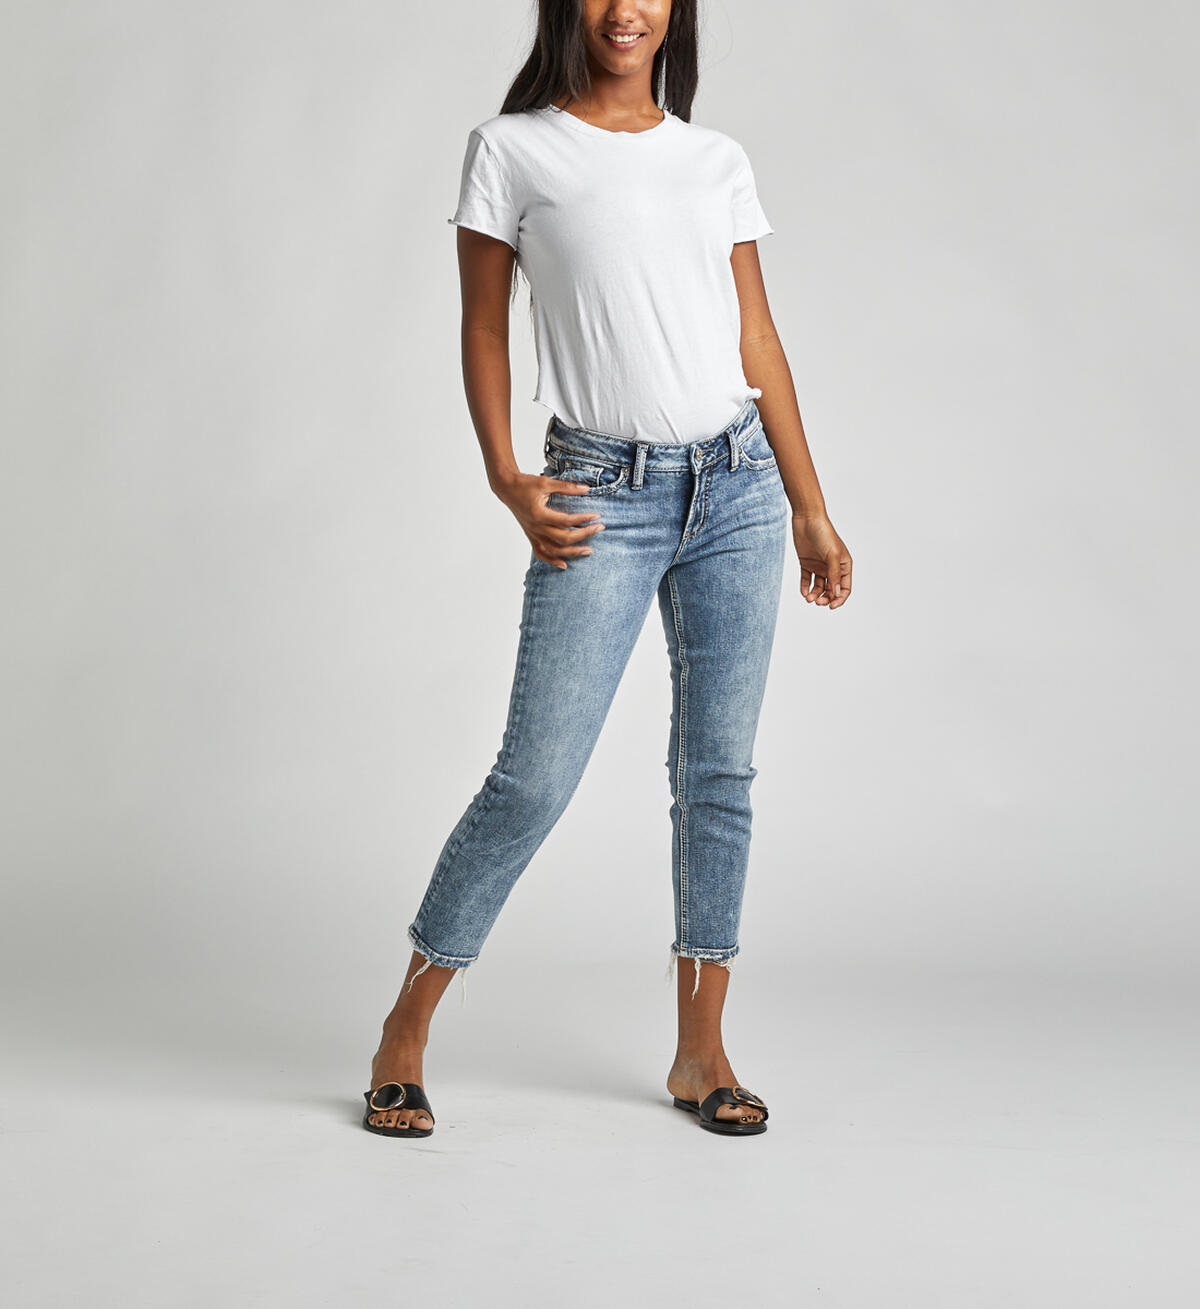 Elyse Mid-Rise Curvy Relaxed Slim Crop Jeans, , hi-res image number 3